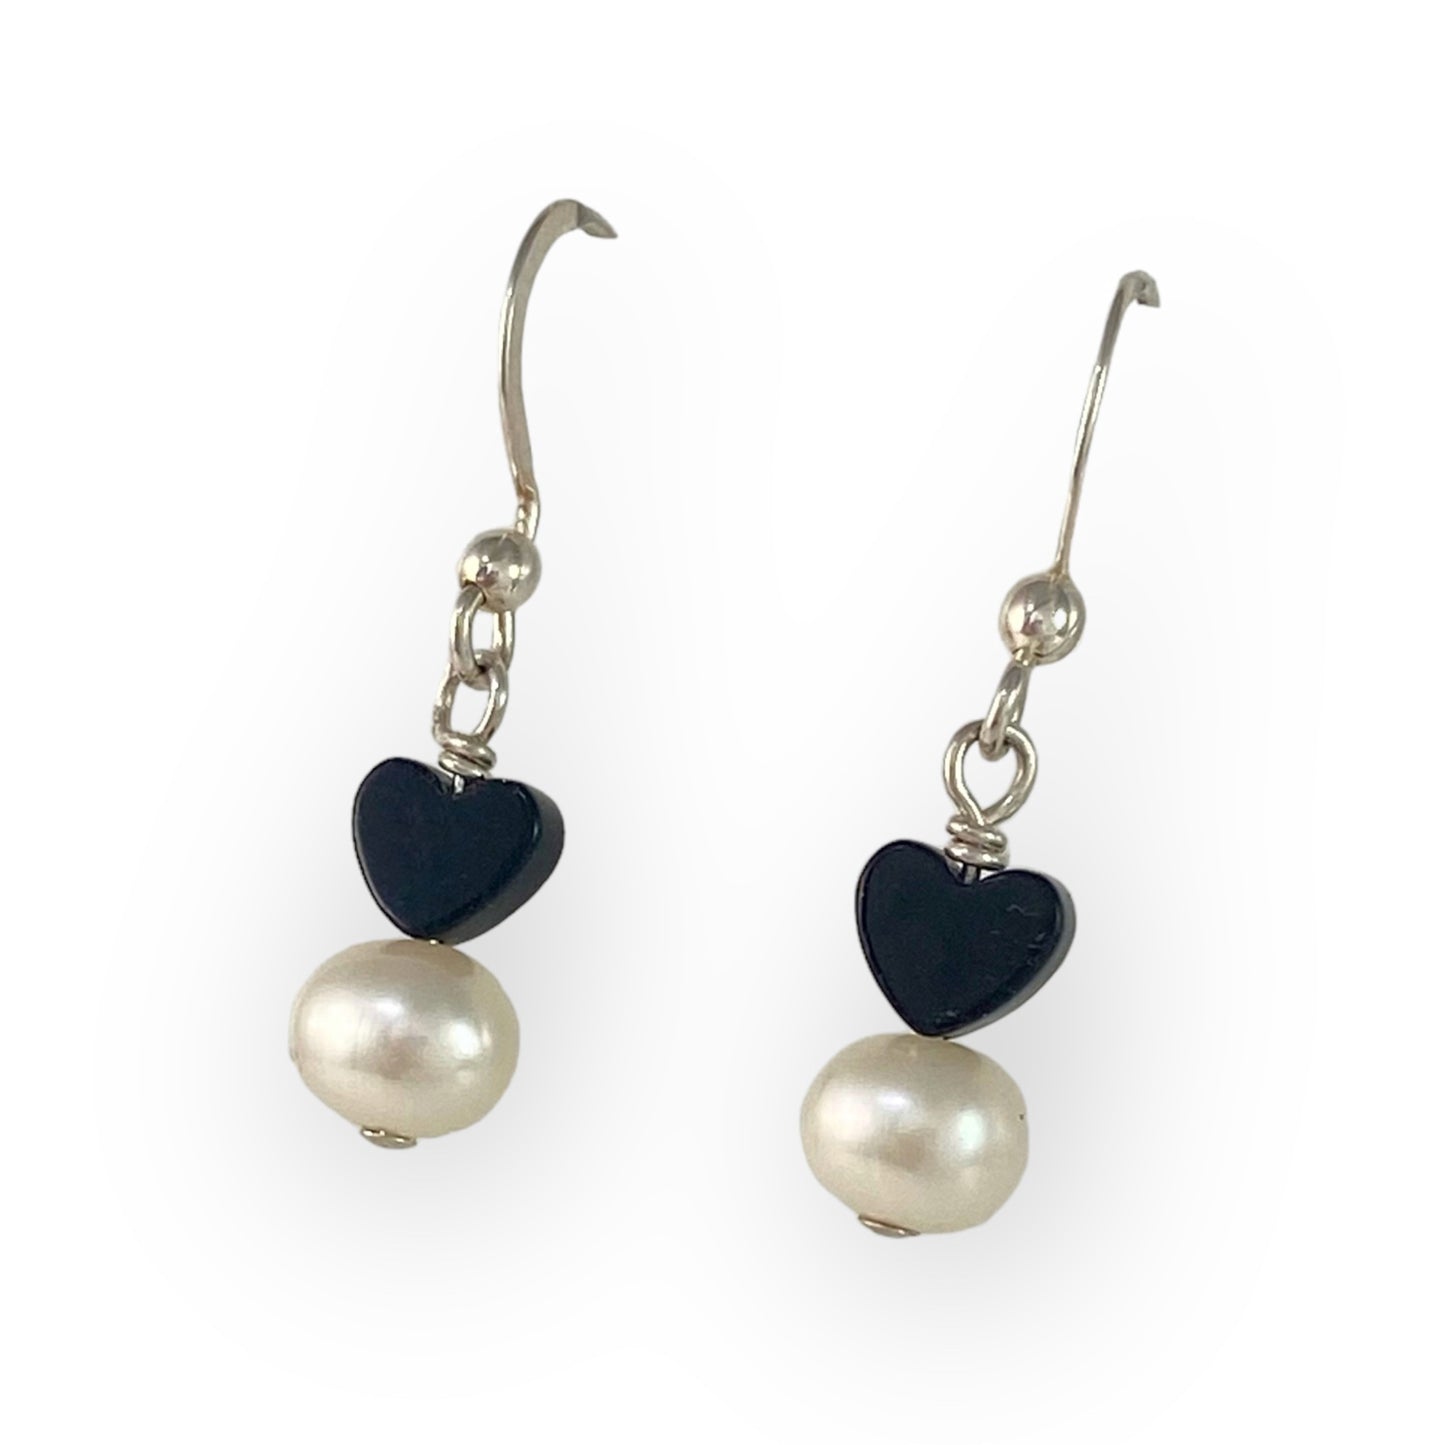 Tiny Black Onyx Heart Earrings with Pearl